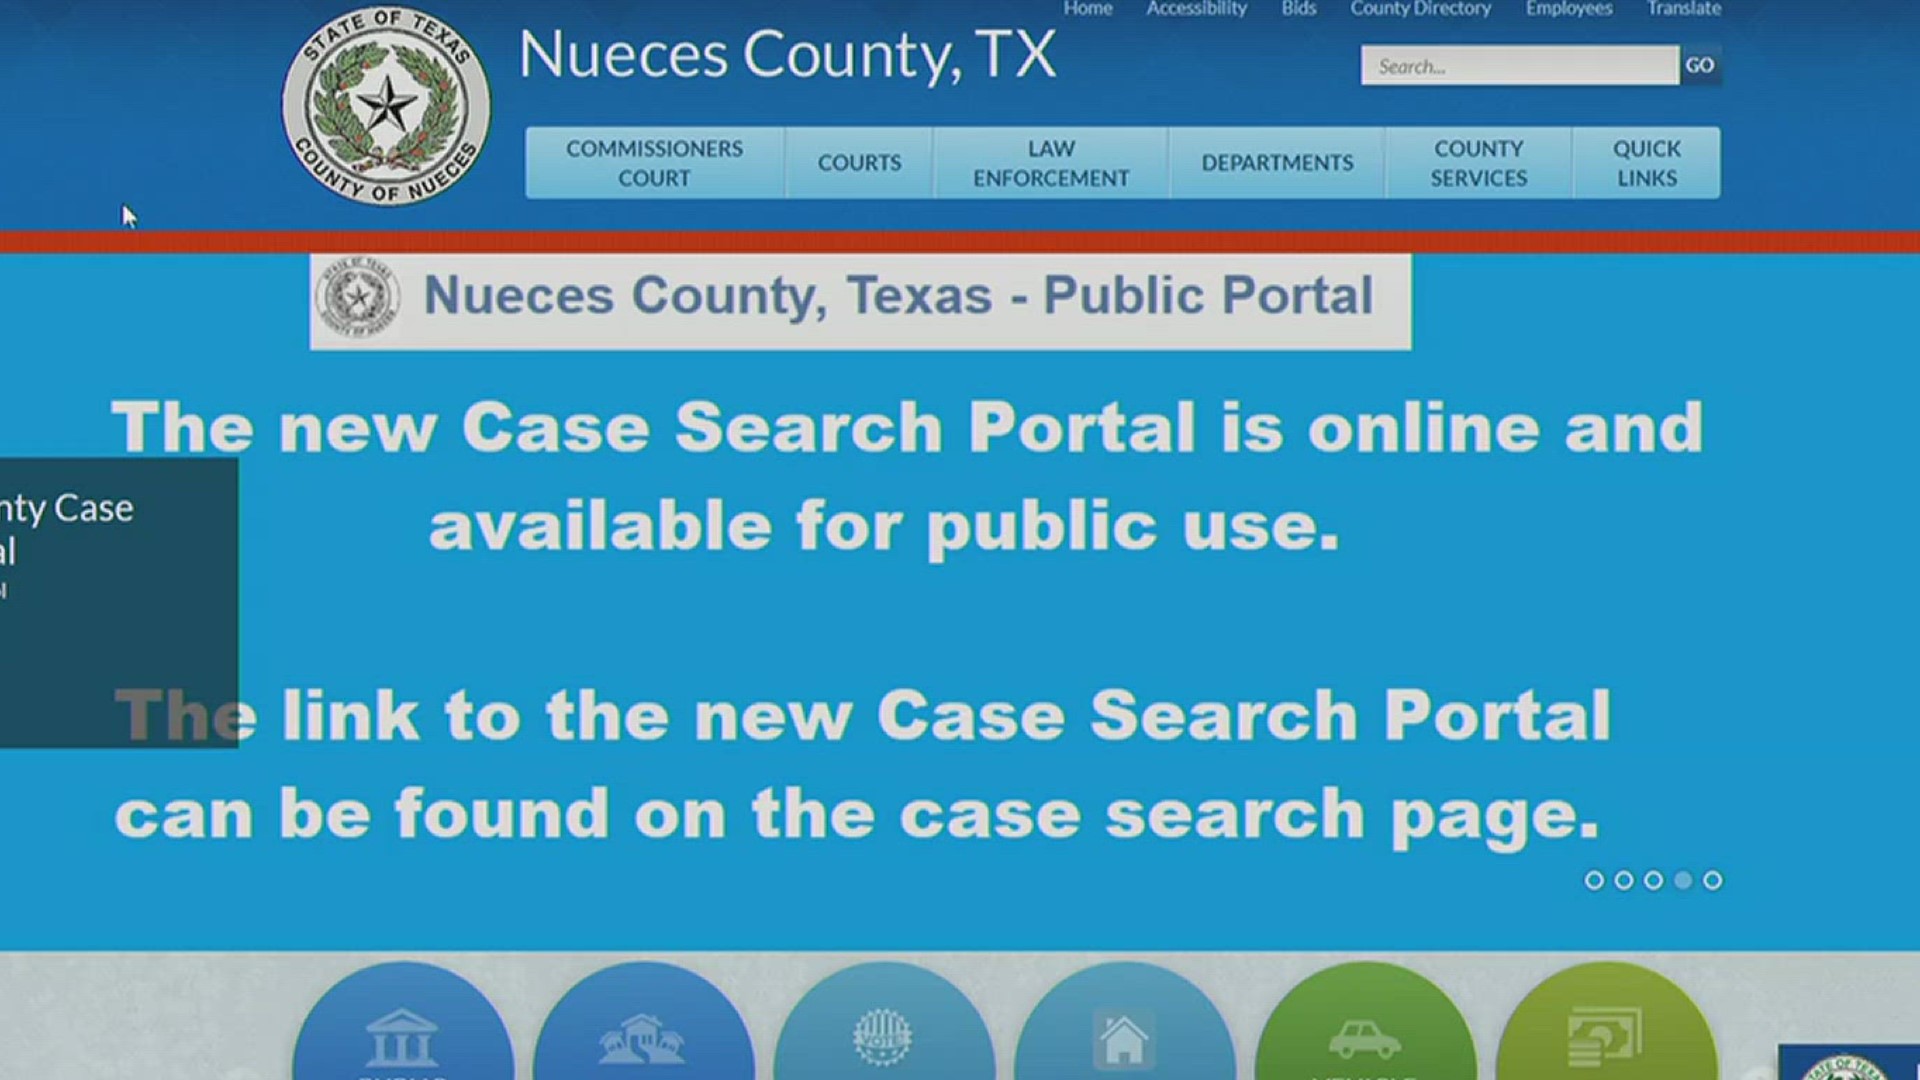 If residents have any personal matters they need to address, they can now utilize the website.